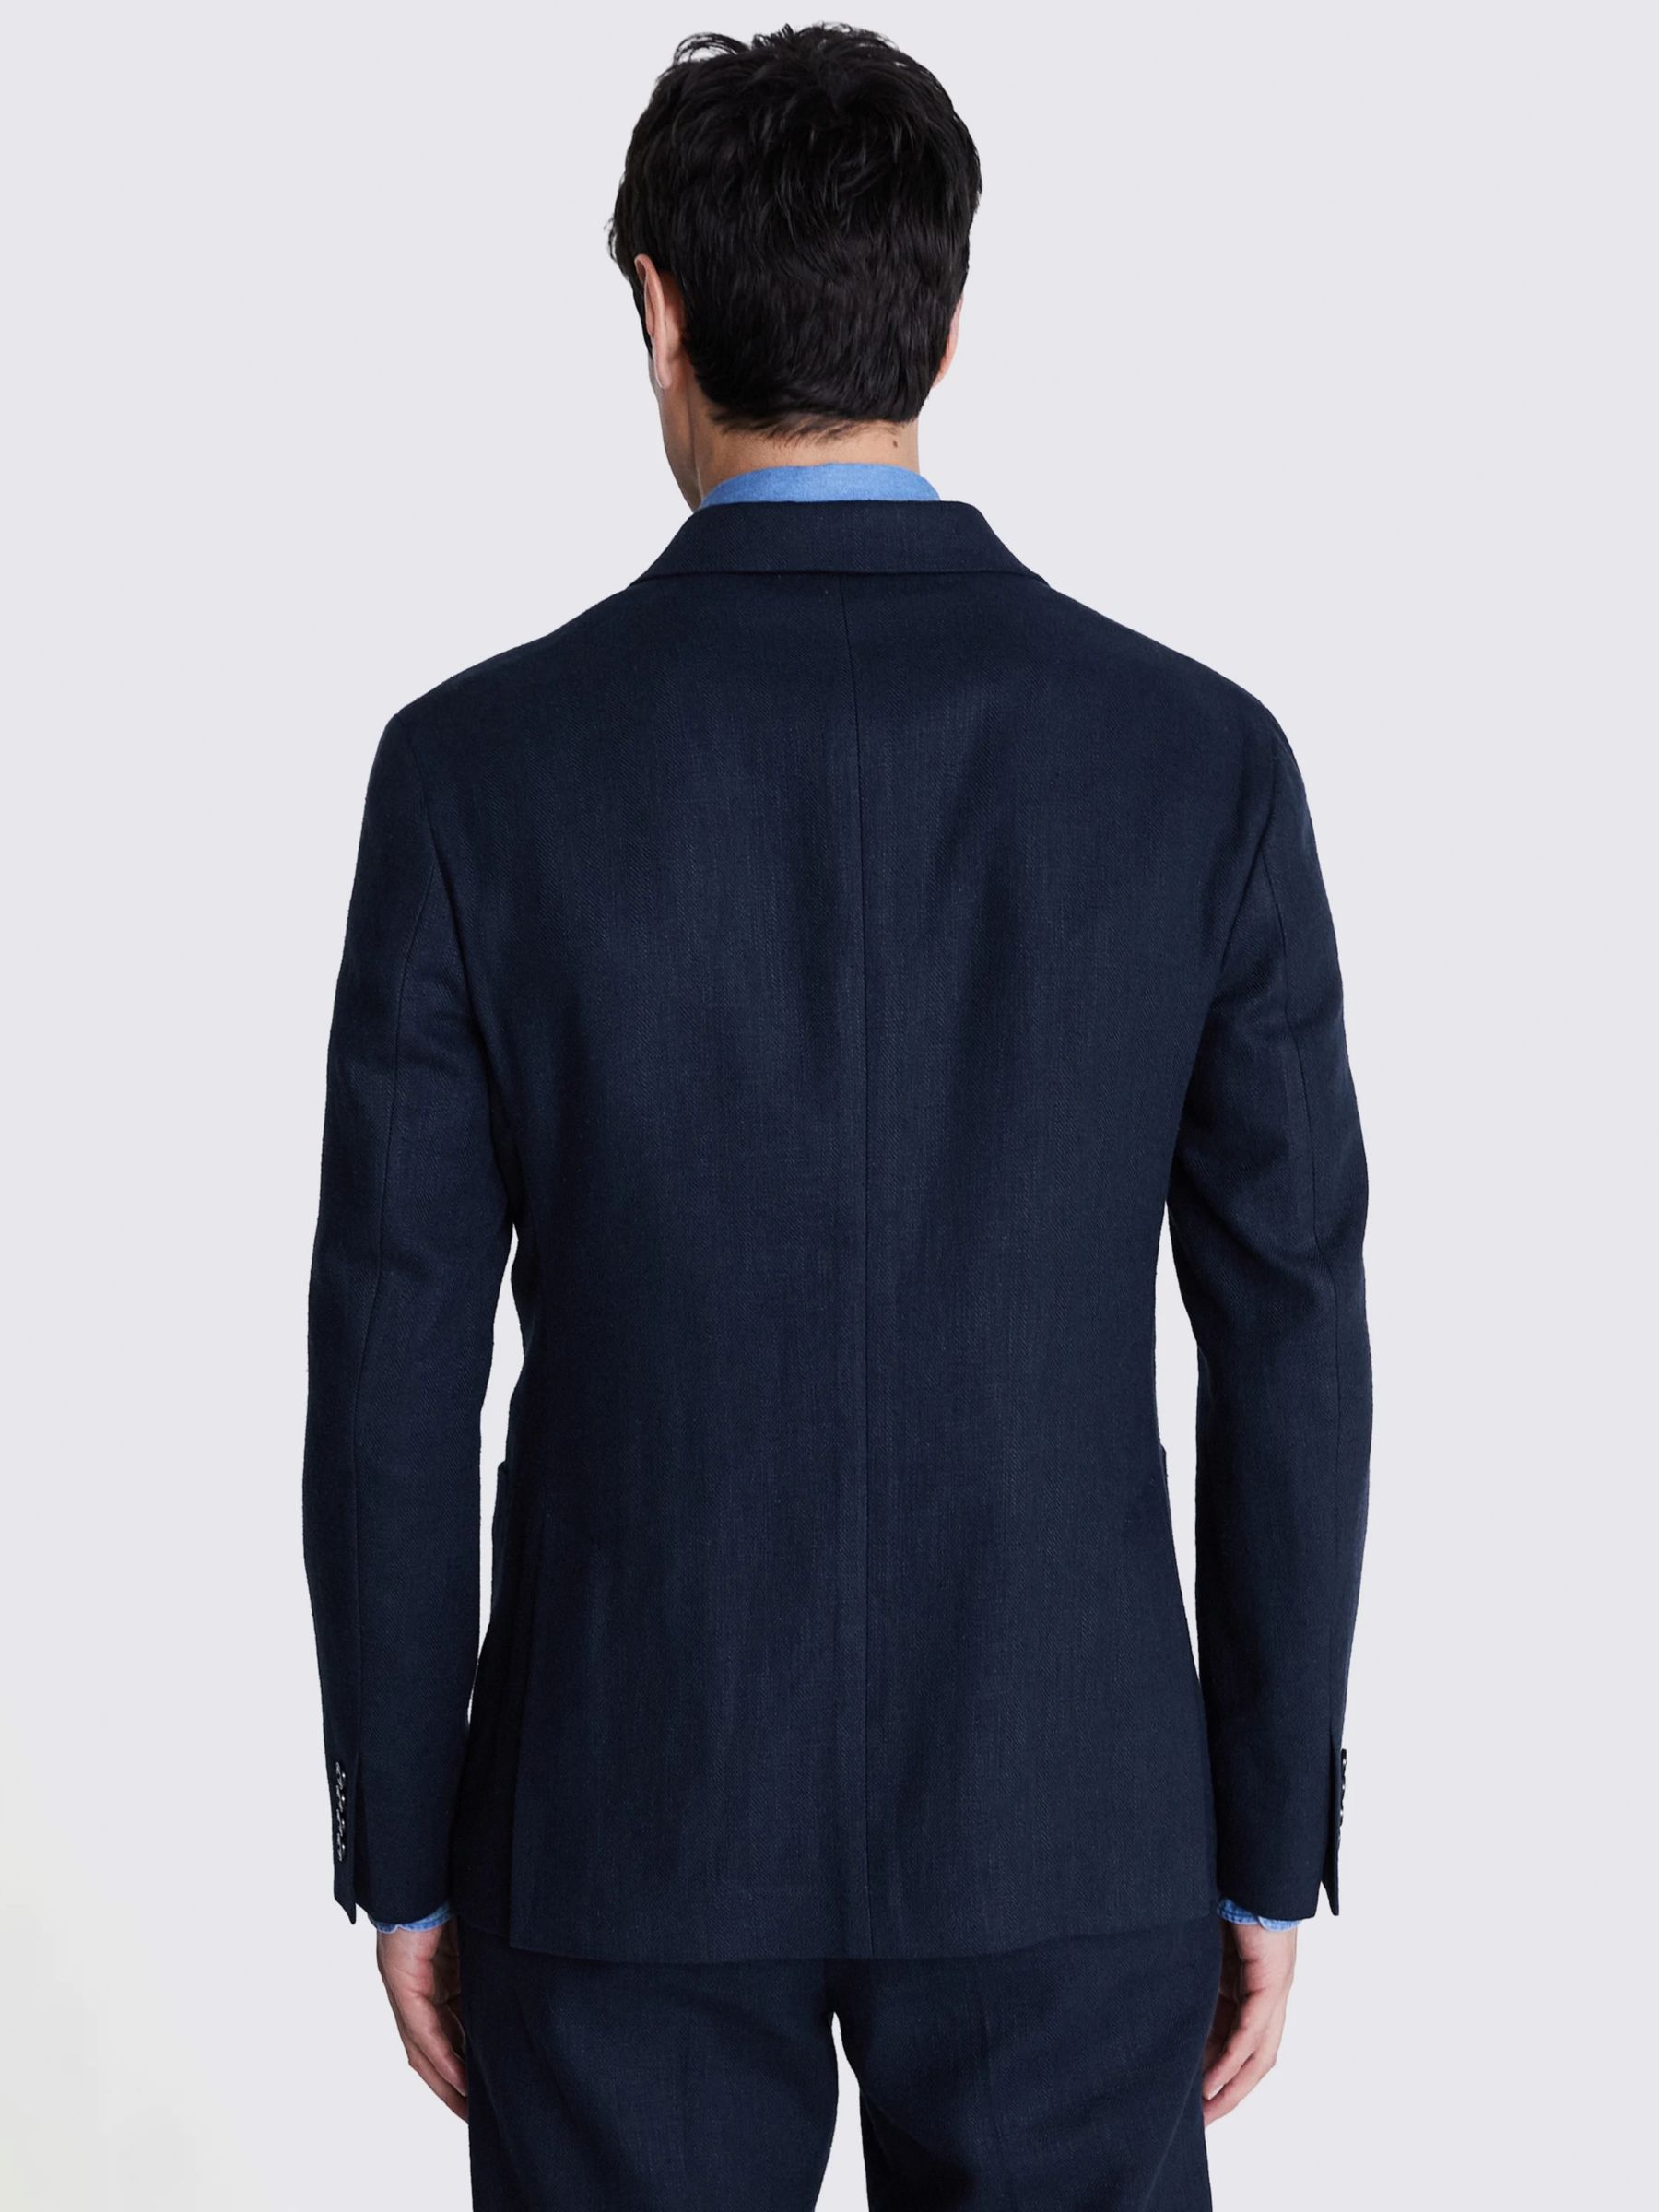 Moss Tailored Fit Double Breasted Herringbone Suit Jacket, Navy, 36R